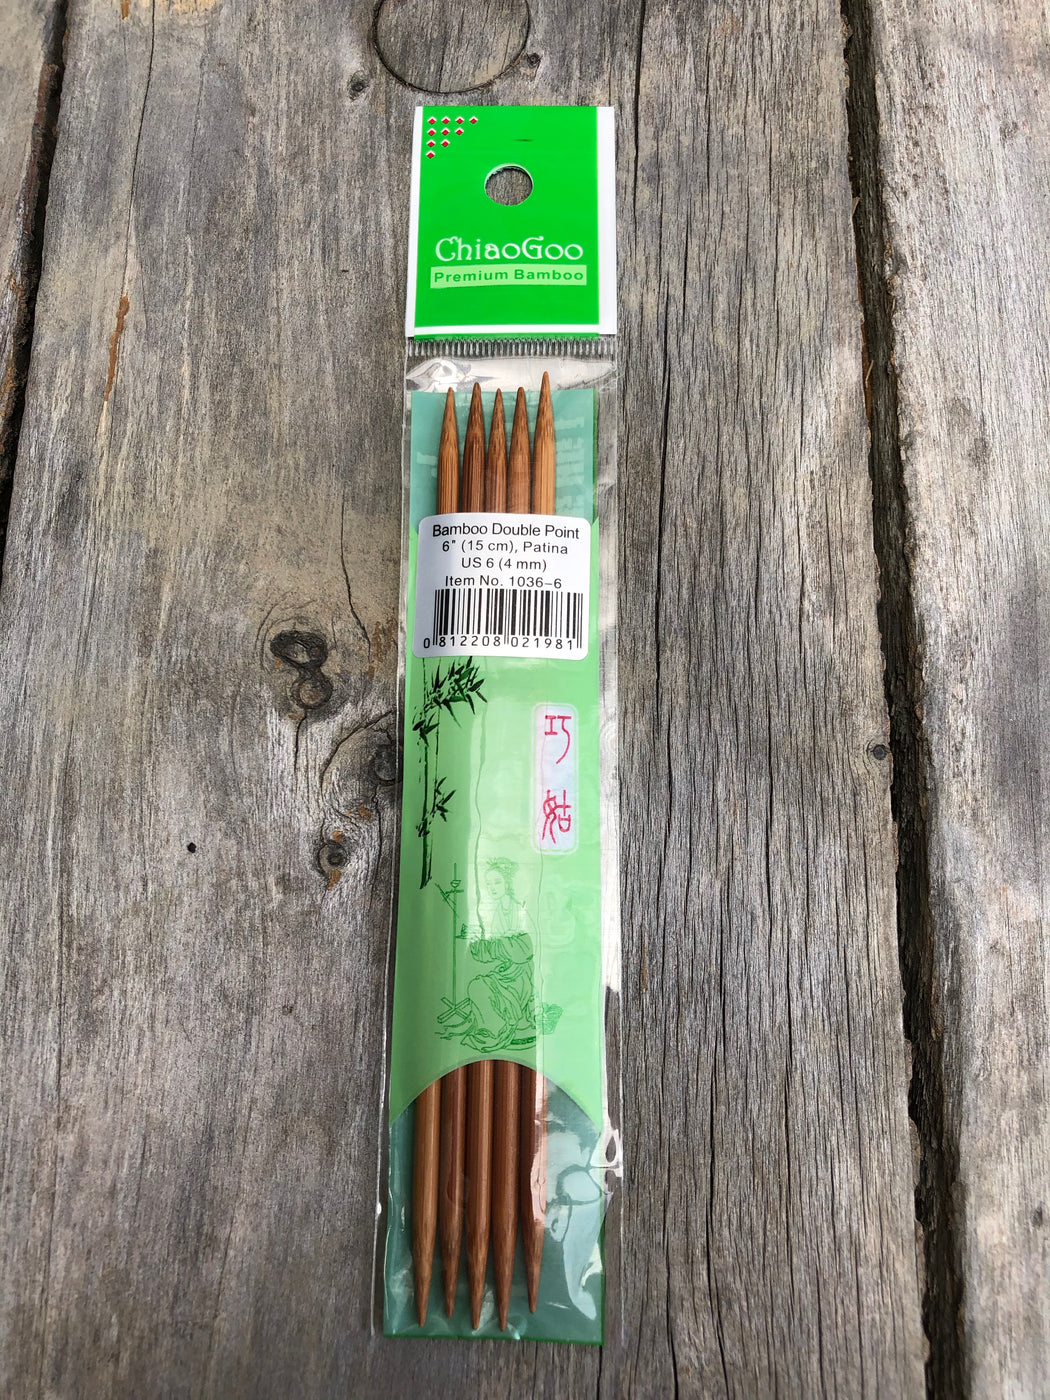 ChiaoGoo double pointed bamboo needles